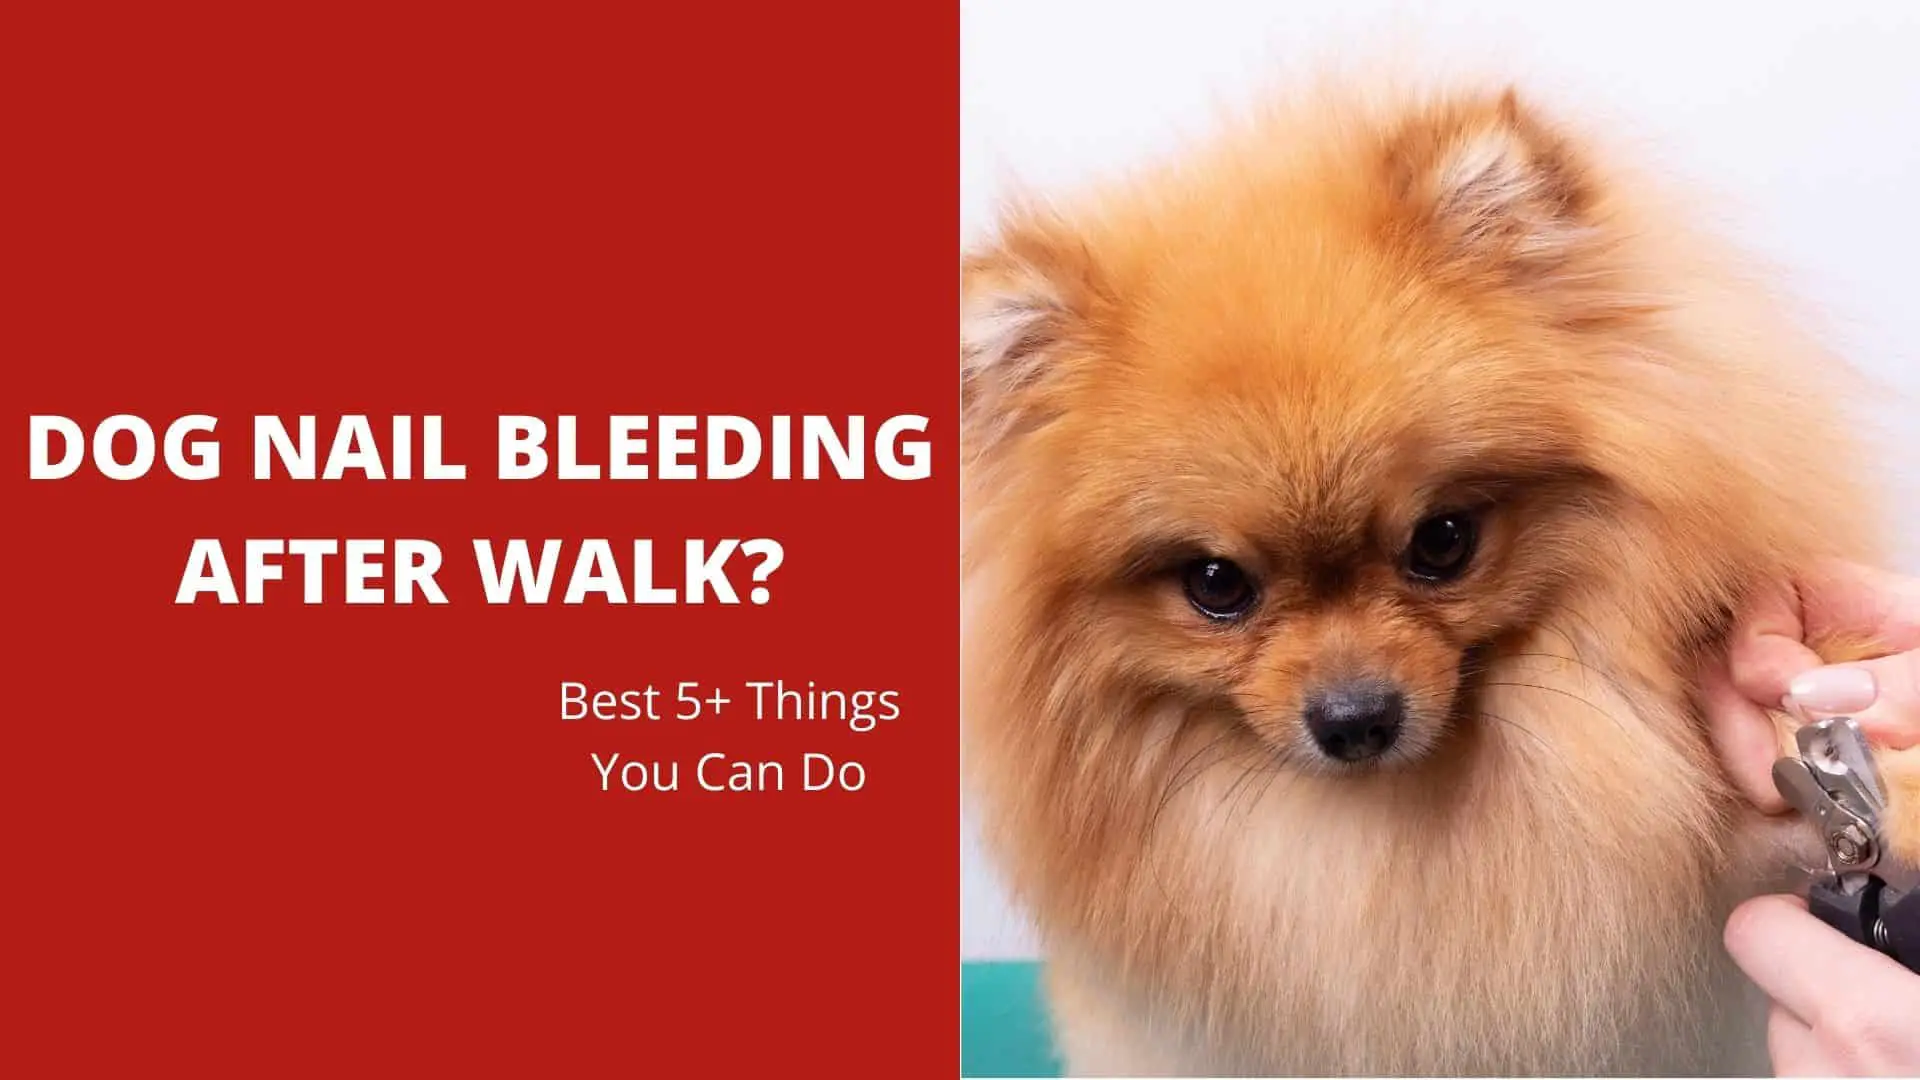 Dog Nail Bleeding After Walk – Best 5+ Things You Can Do